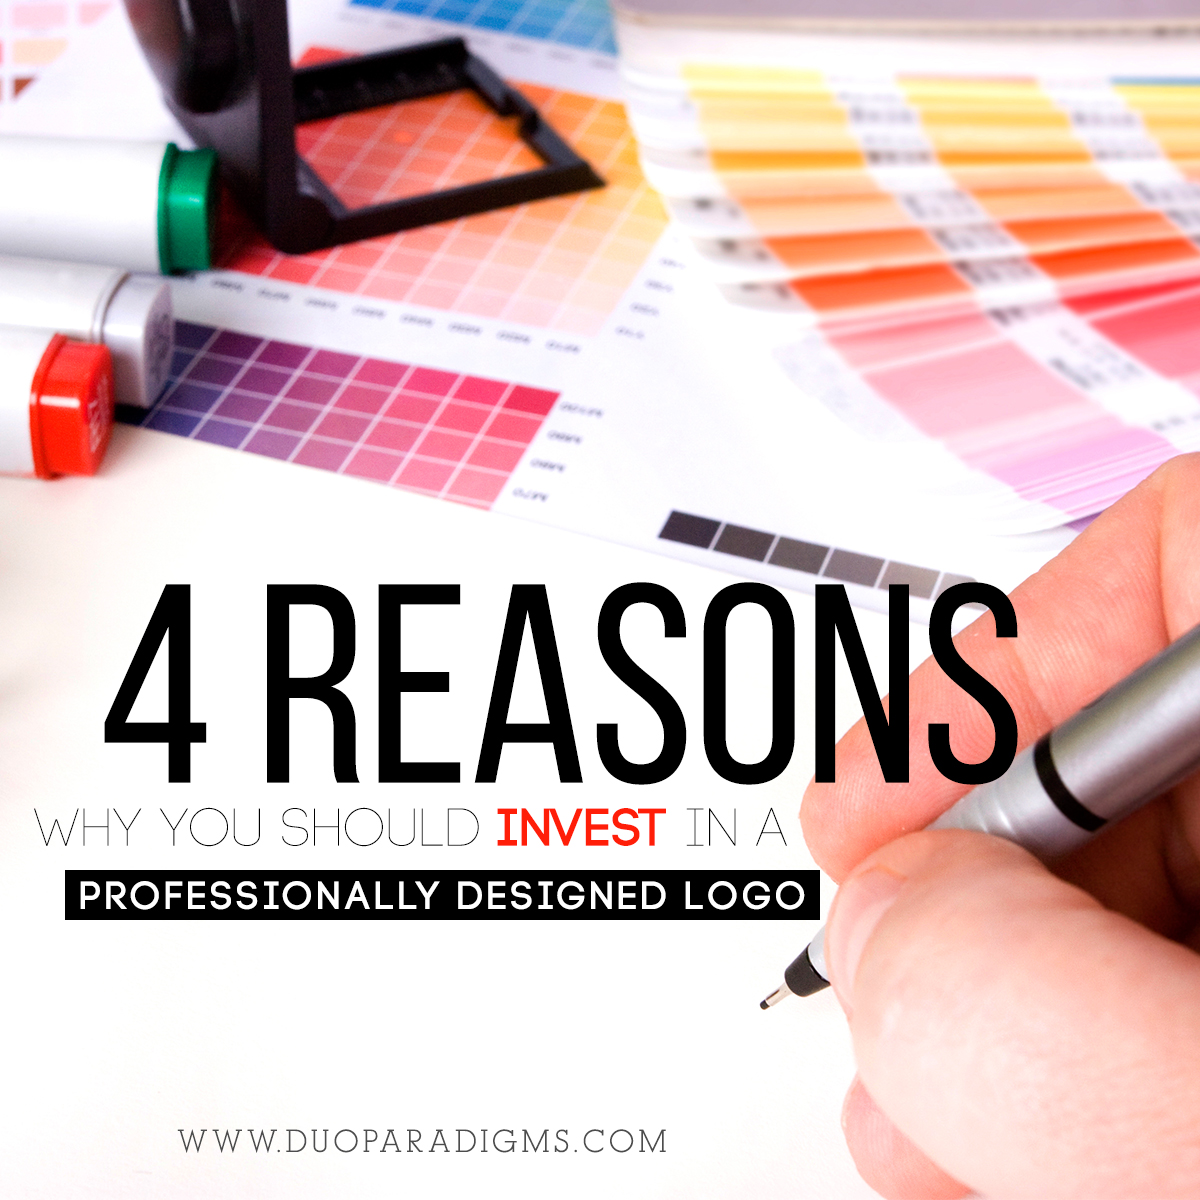 4 Reasons Why You Should Invest in a Professionally Designed Logo